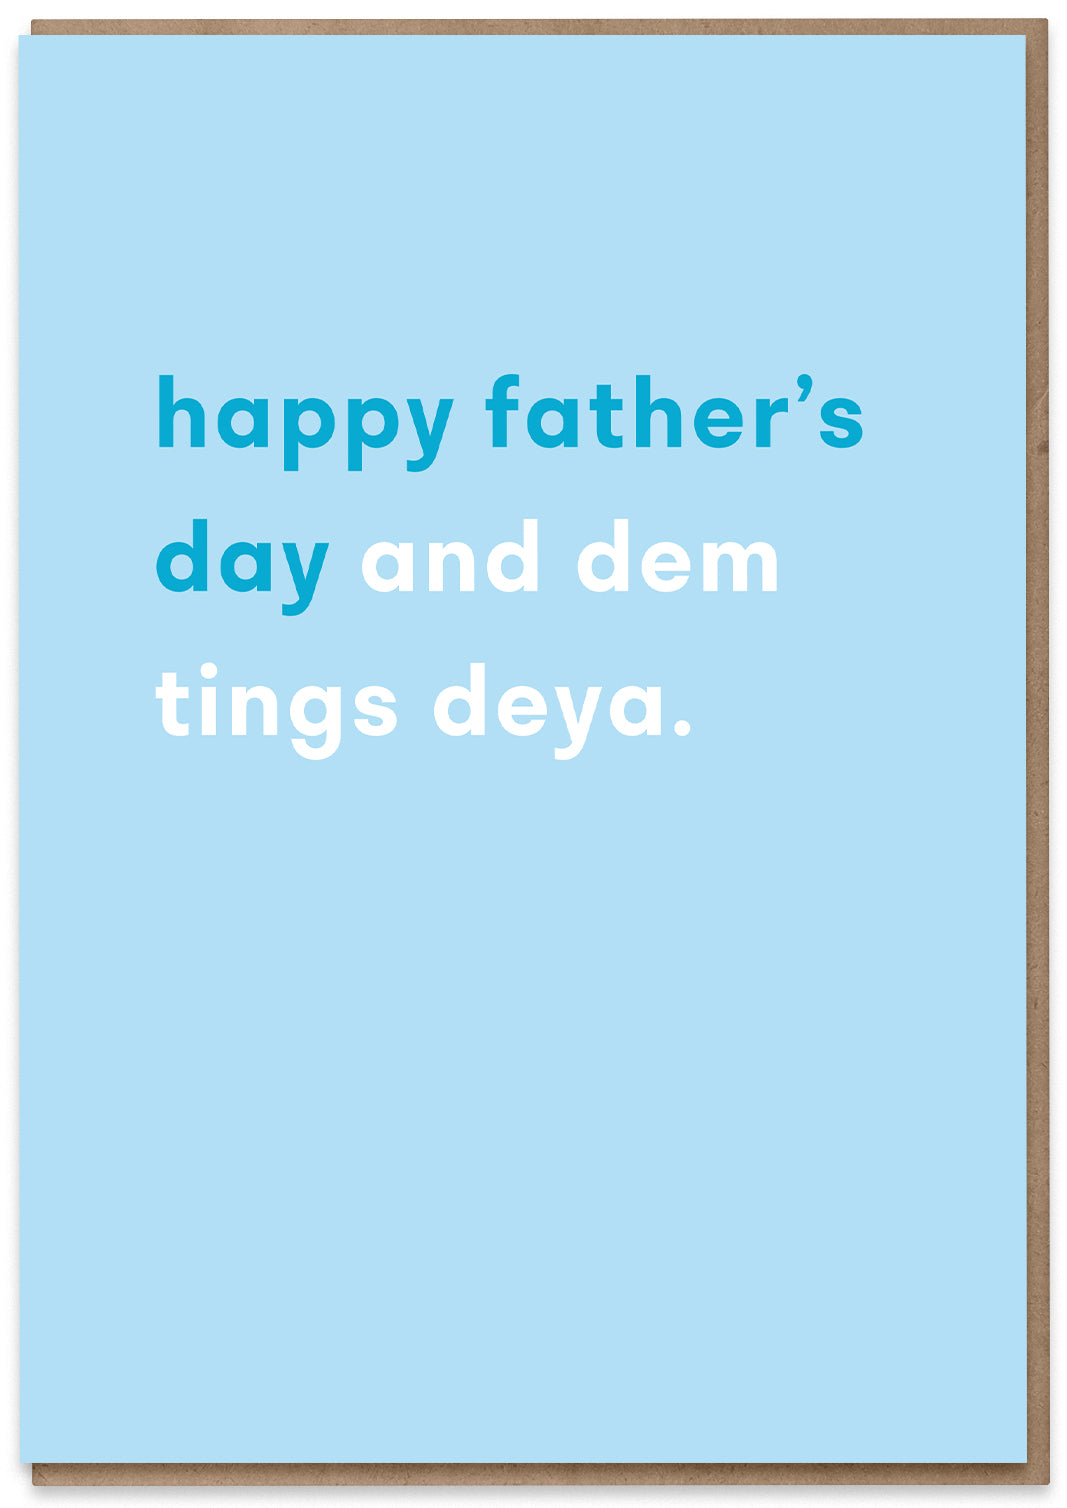 Father's Day (and dem tings deya)